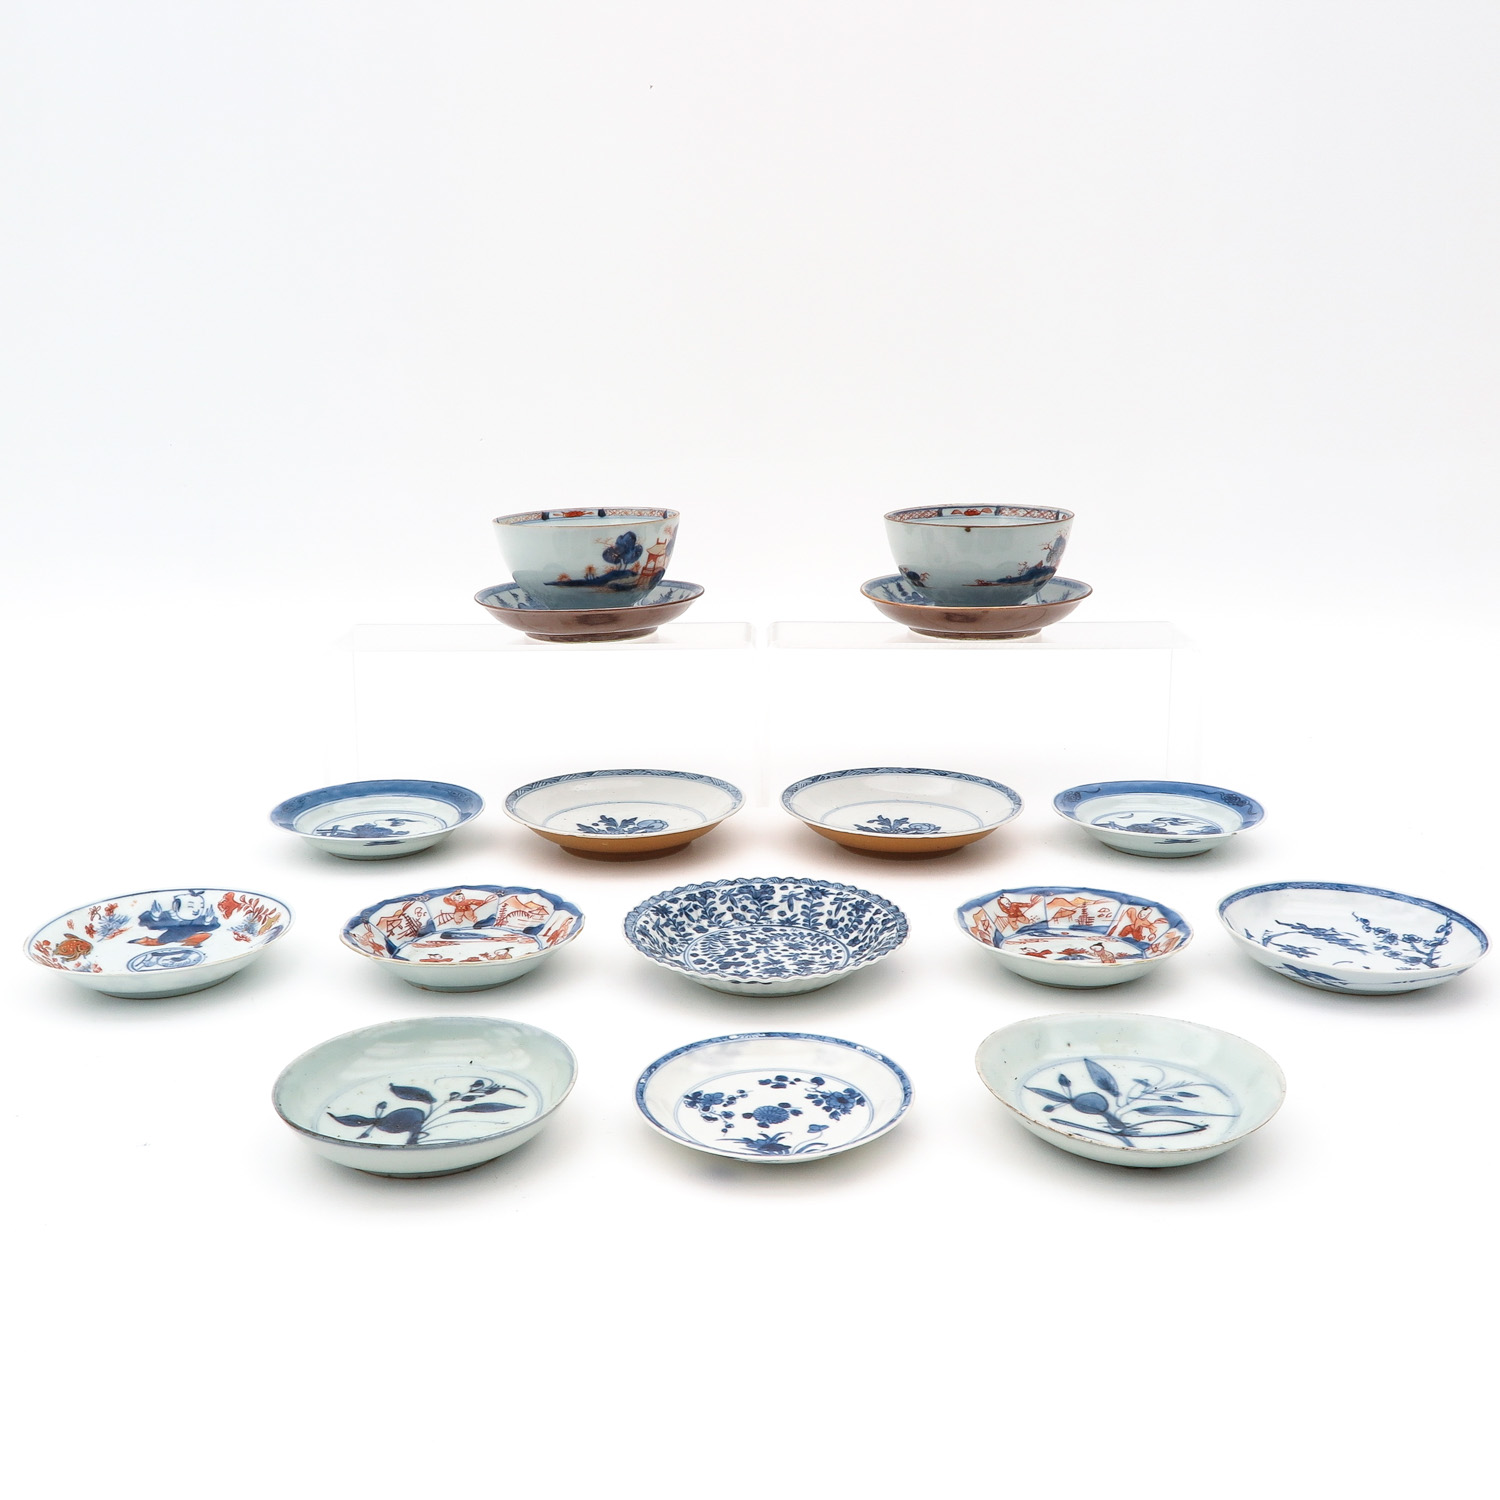 A Diverse Collection of Porcelain - Image 4 of 8